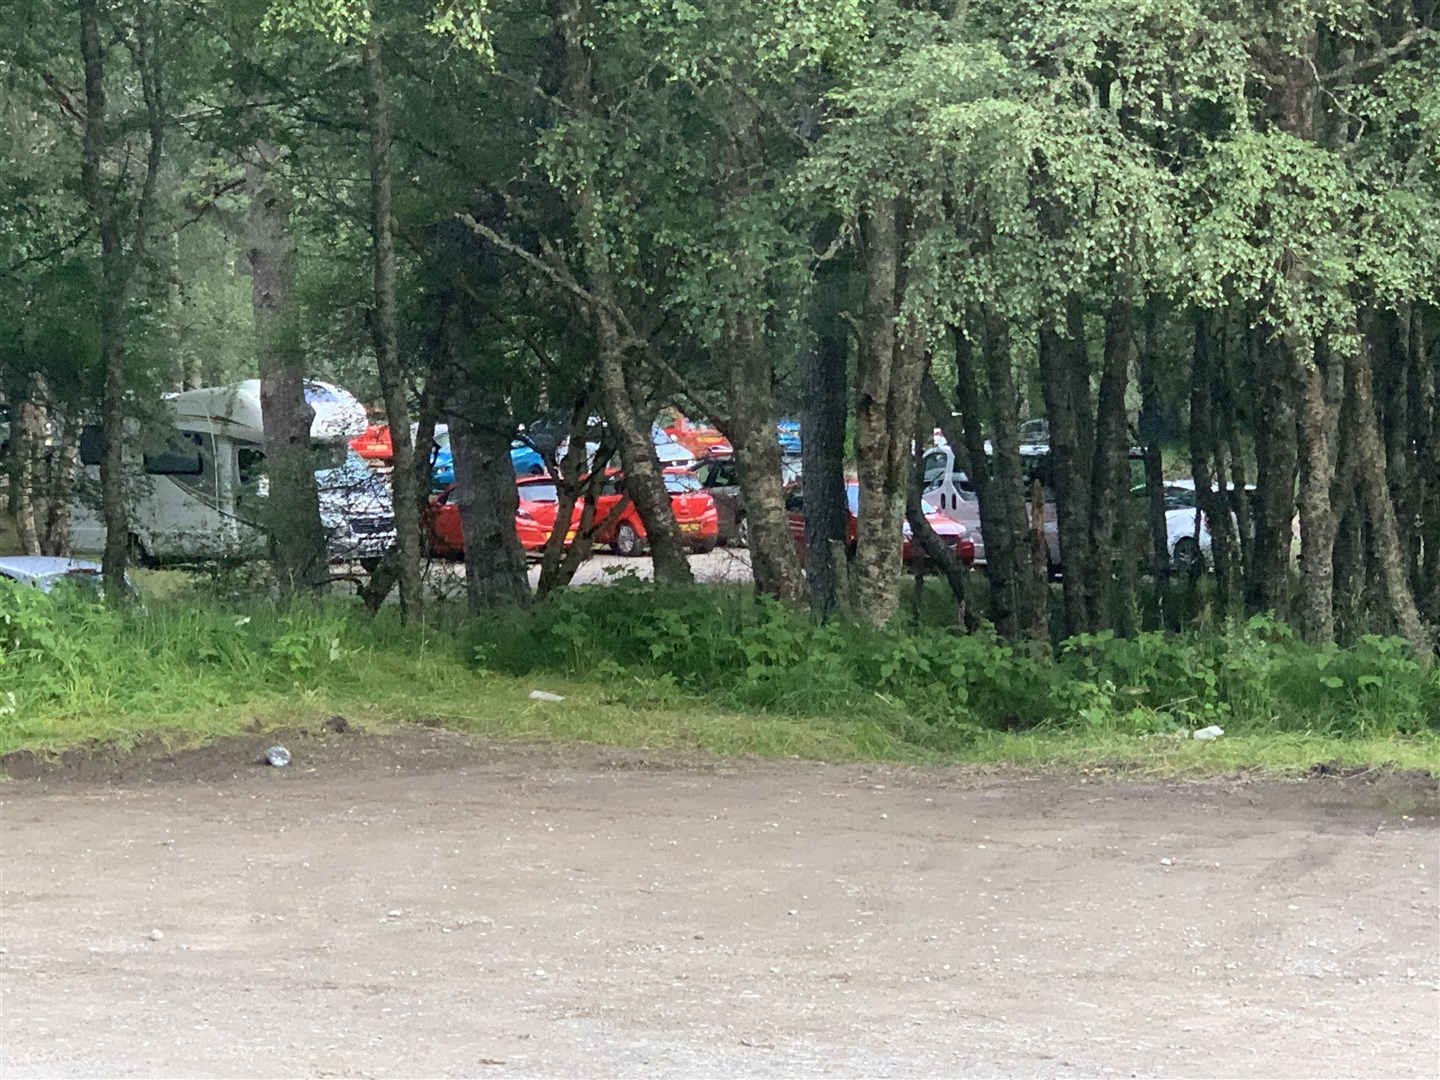 There was a big rise in uncontrolled camping at Glenmore caused by the end of lockdown and the closure of Glenmore Campsite. Pictured are cars parked late one weekend by Loch Morlich despite a ban on overnight parking.